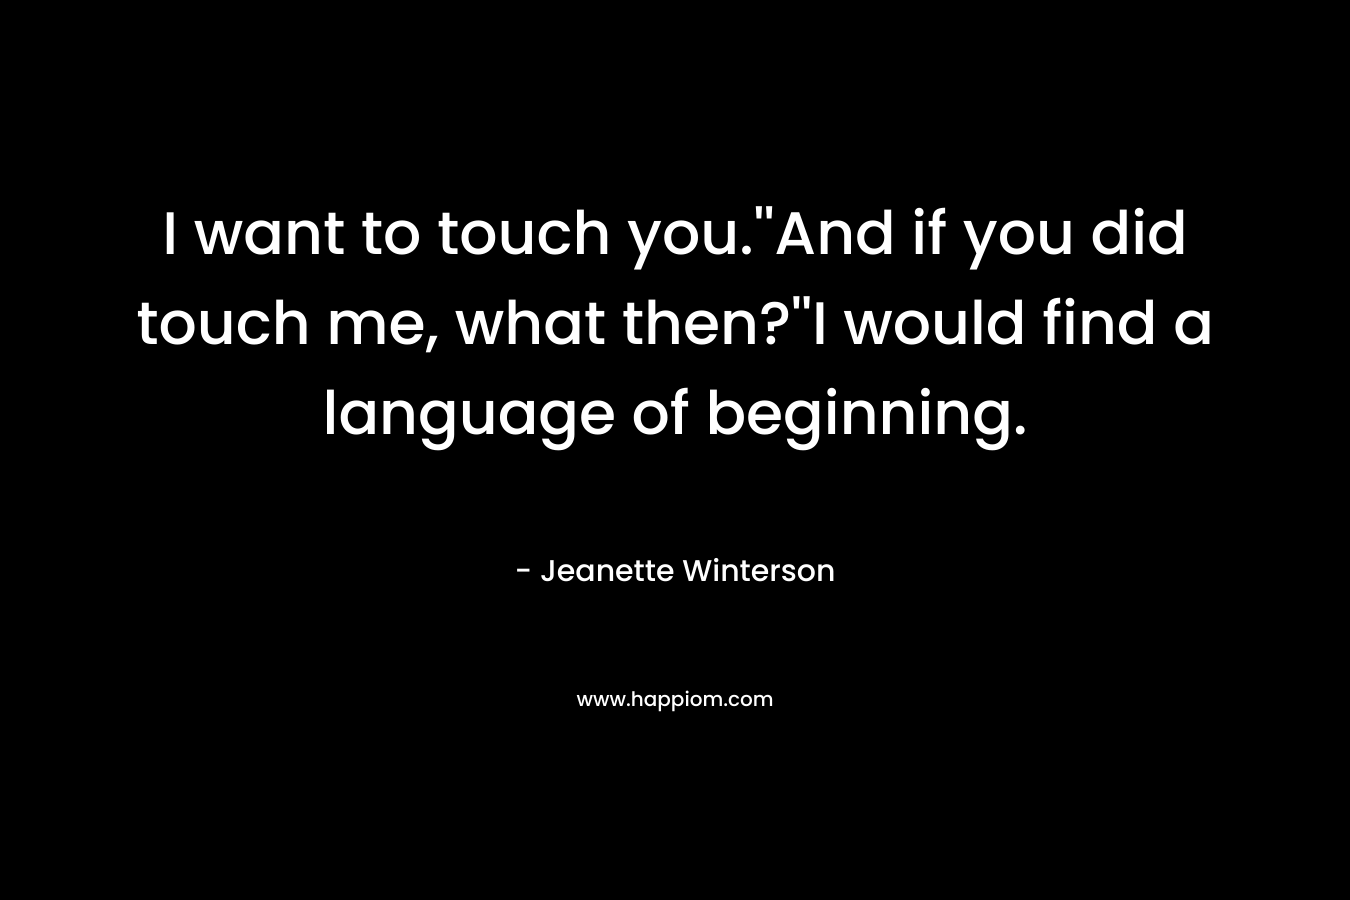 I want to touch you.”And if you did touch me, what then?”I would find a language of beginning. – Jeanette Winterson